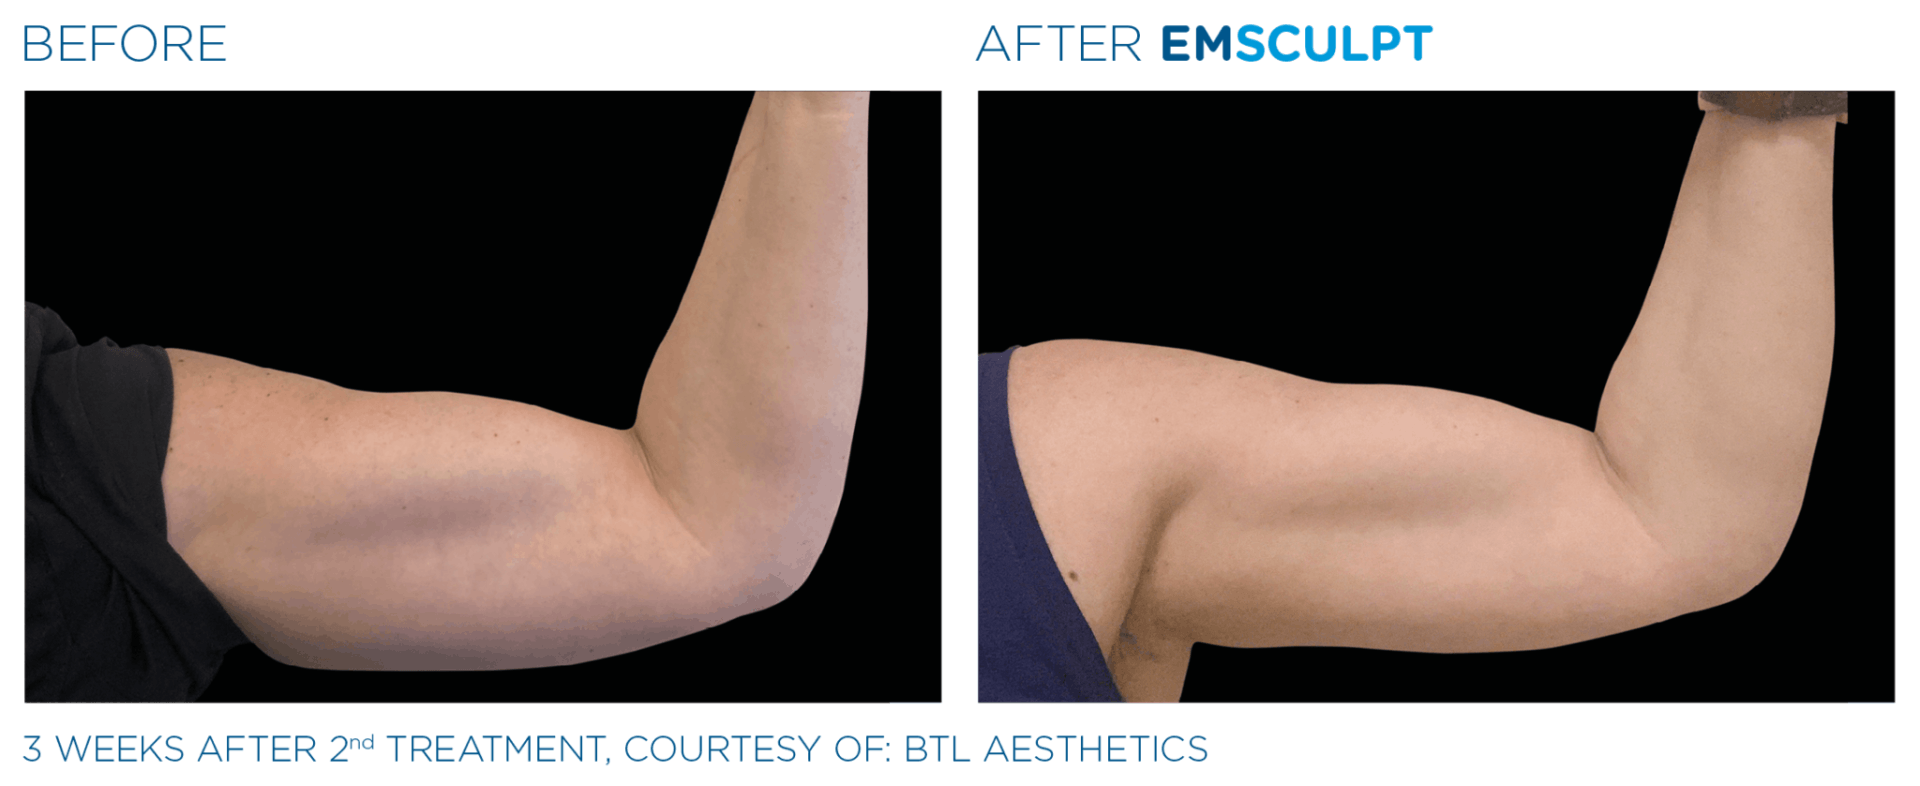 before and after results of Emsculpt machine treatments on arms